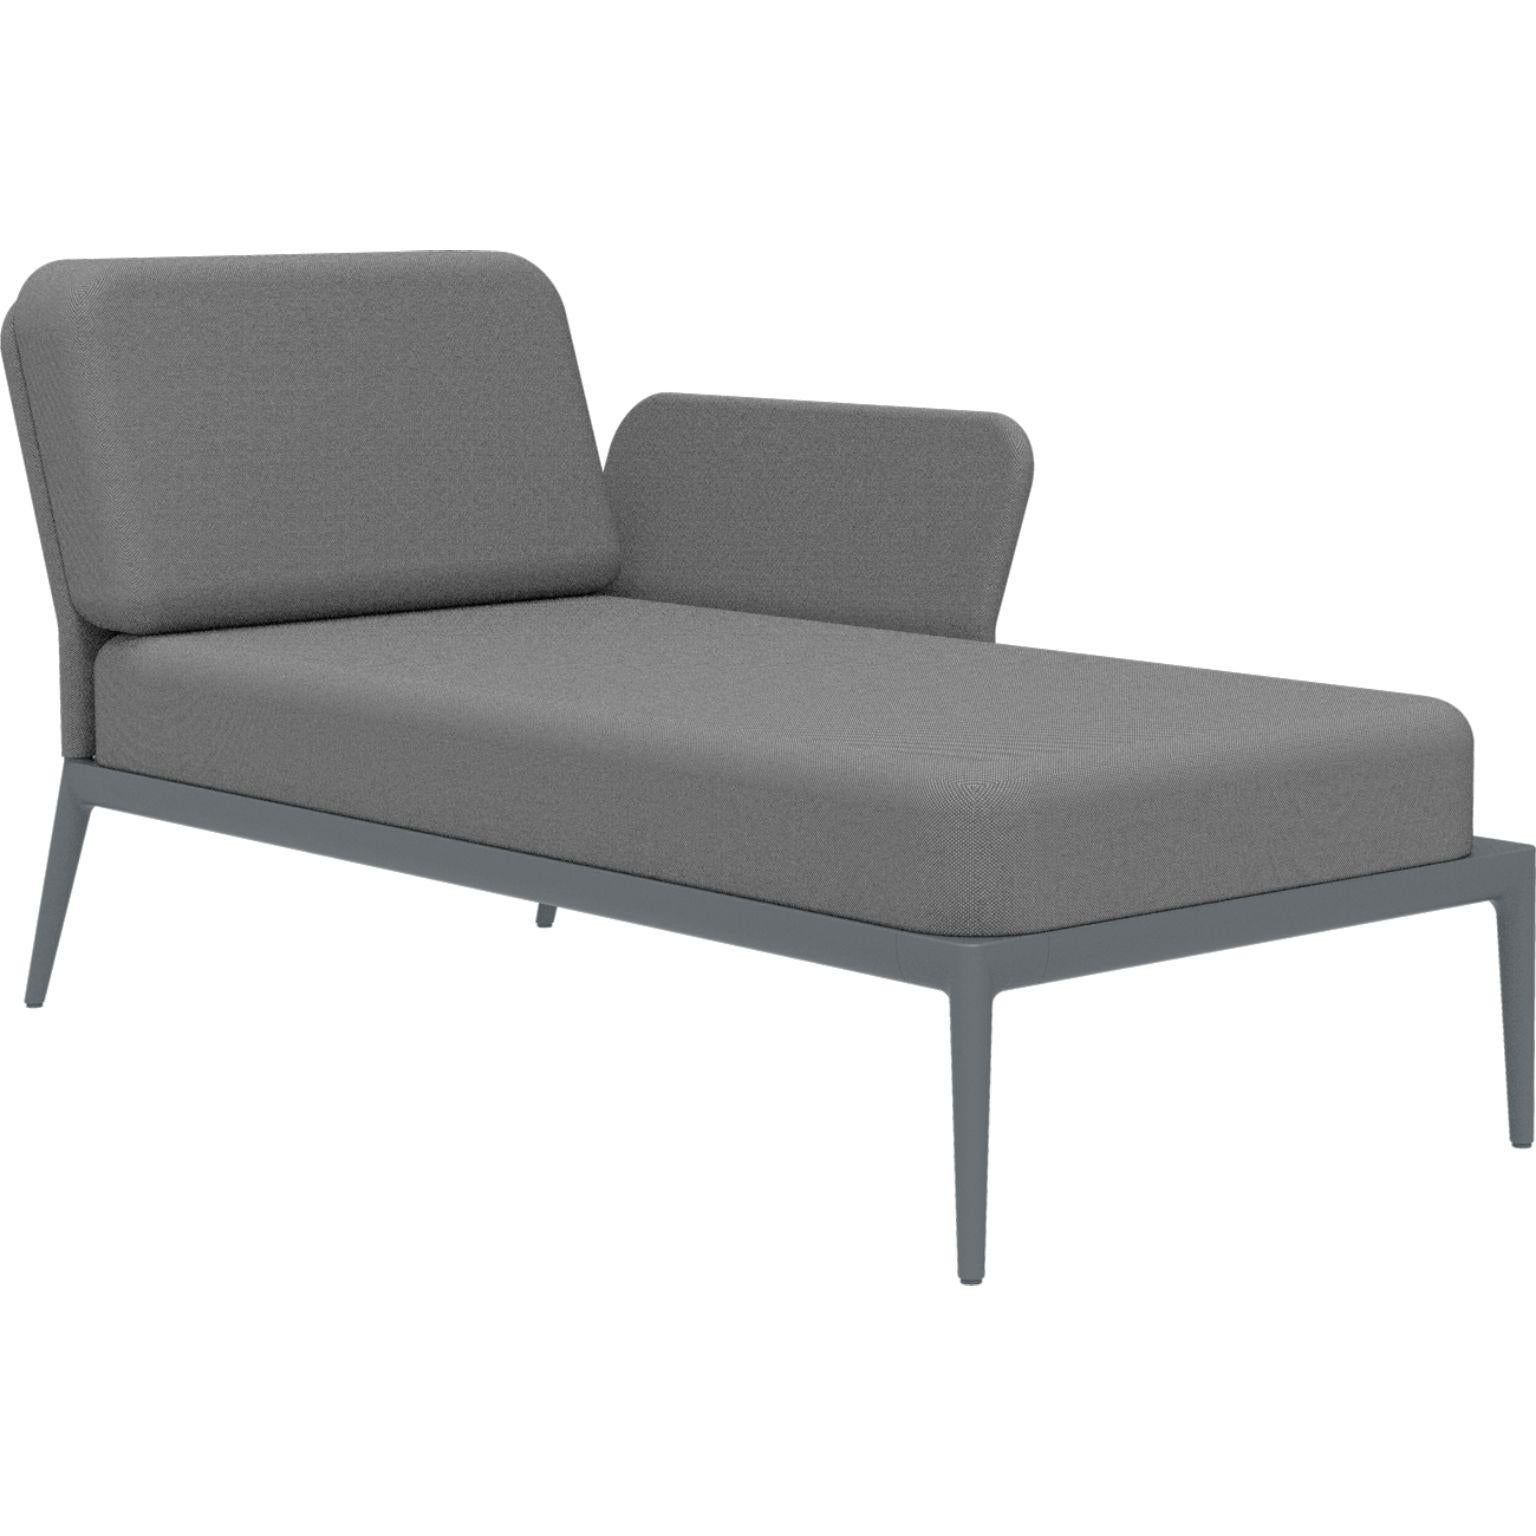 Cover Grey Left Chaise Longue by MOWEE
Dimensions: D80 x W155 x H81 cm (seat height 42 cm).
Material: Aluminum and upholstery.
Weight: 28 kg.
Also available in different colors and finishes. Please contact us.

An unmistakable collection for